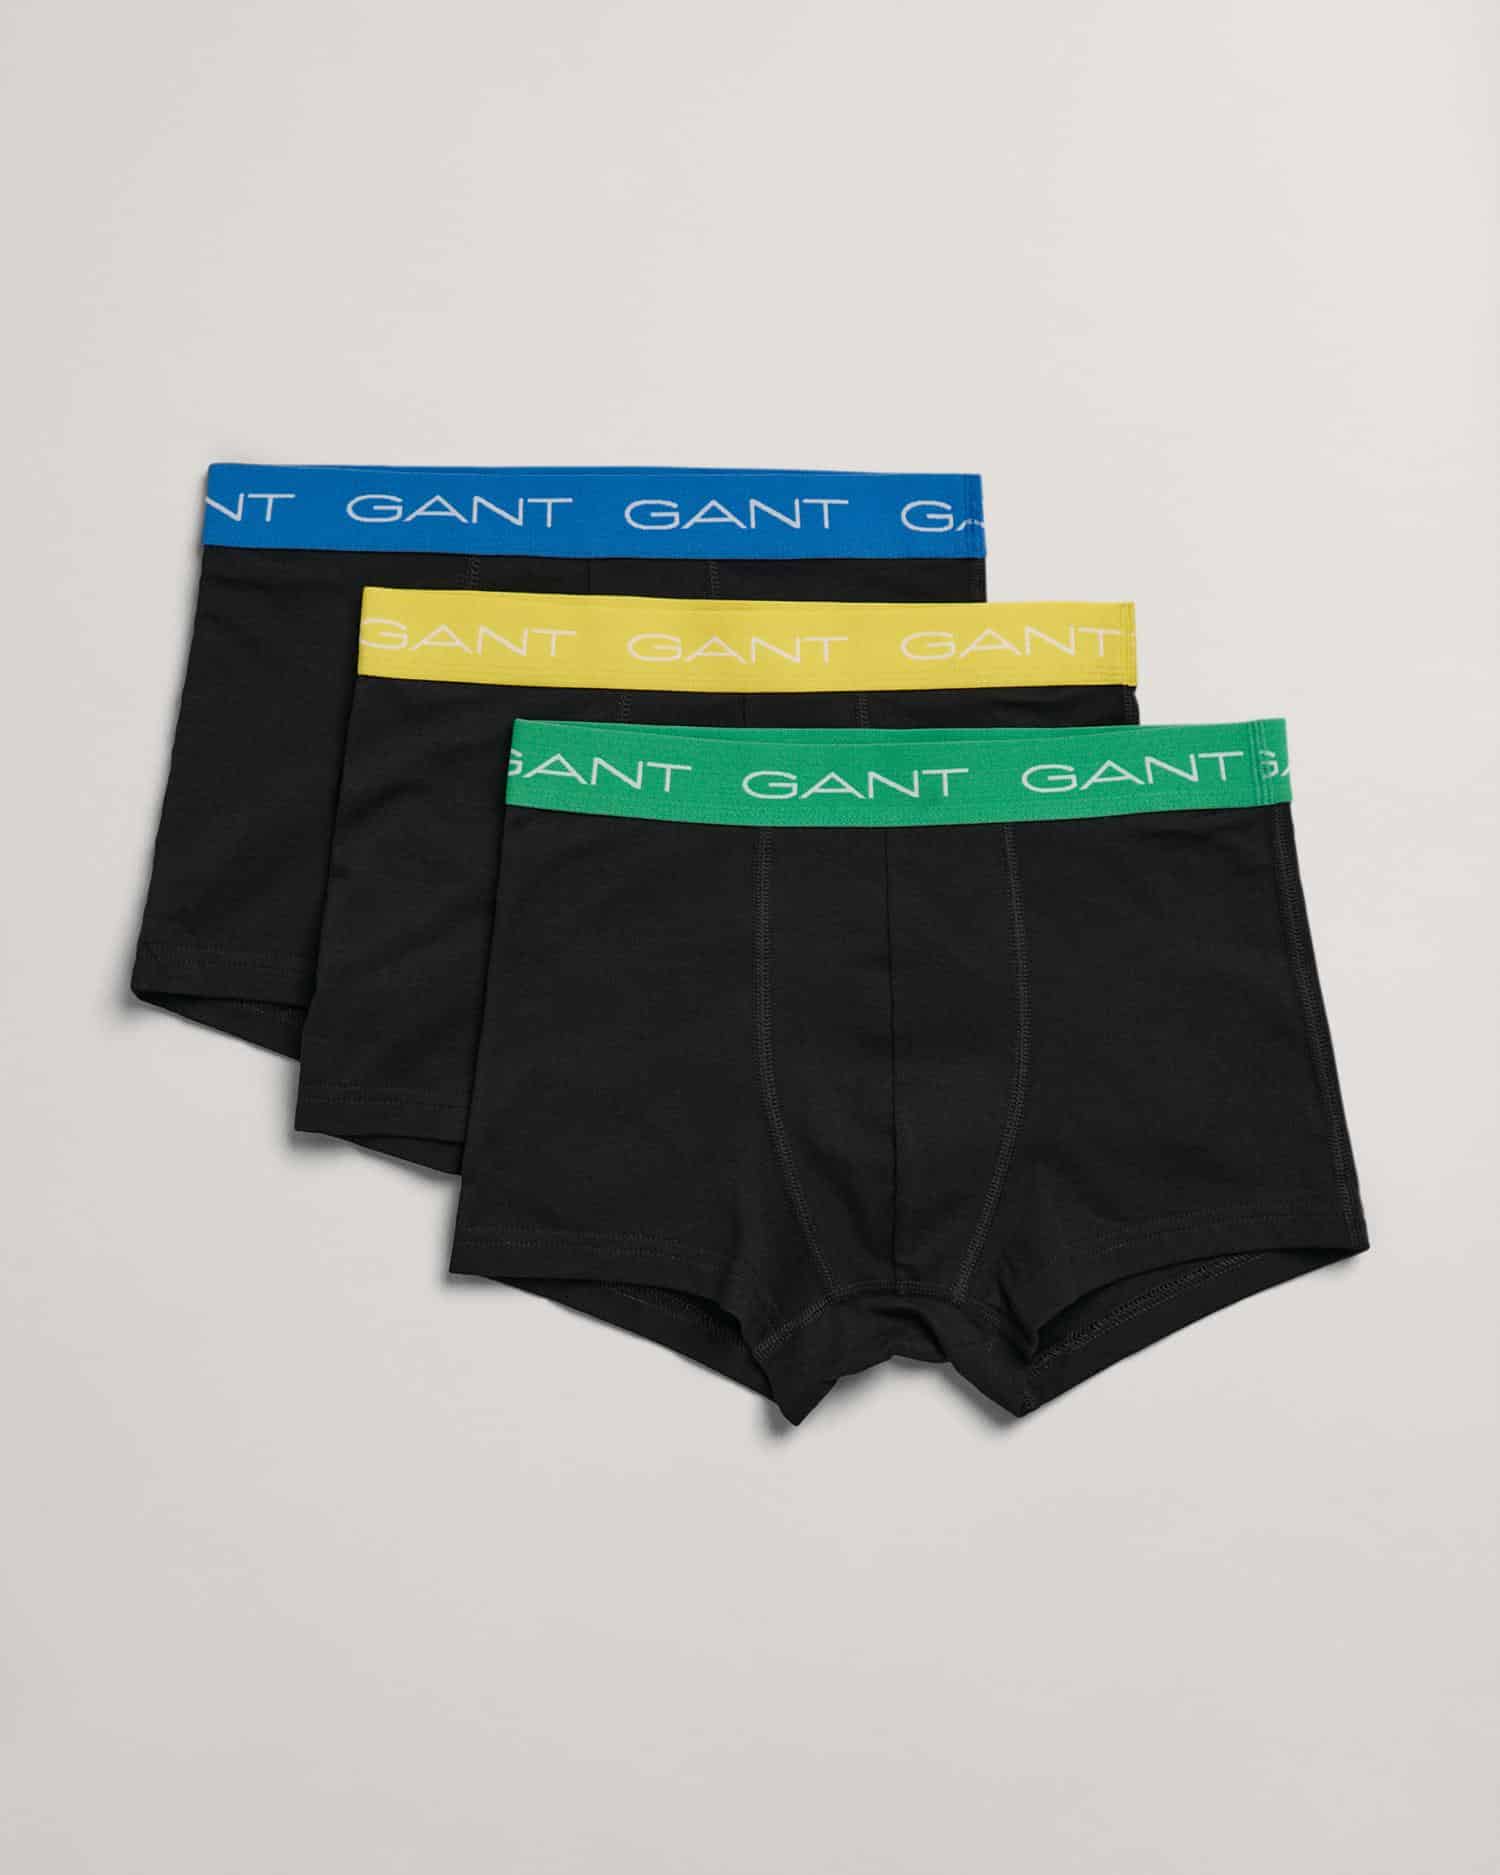 Gant 3 boxer shorts for boys with blue, red and yellow